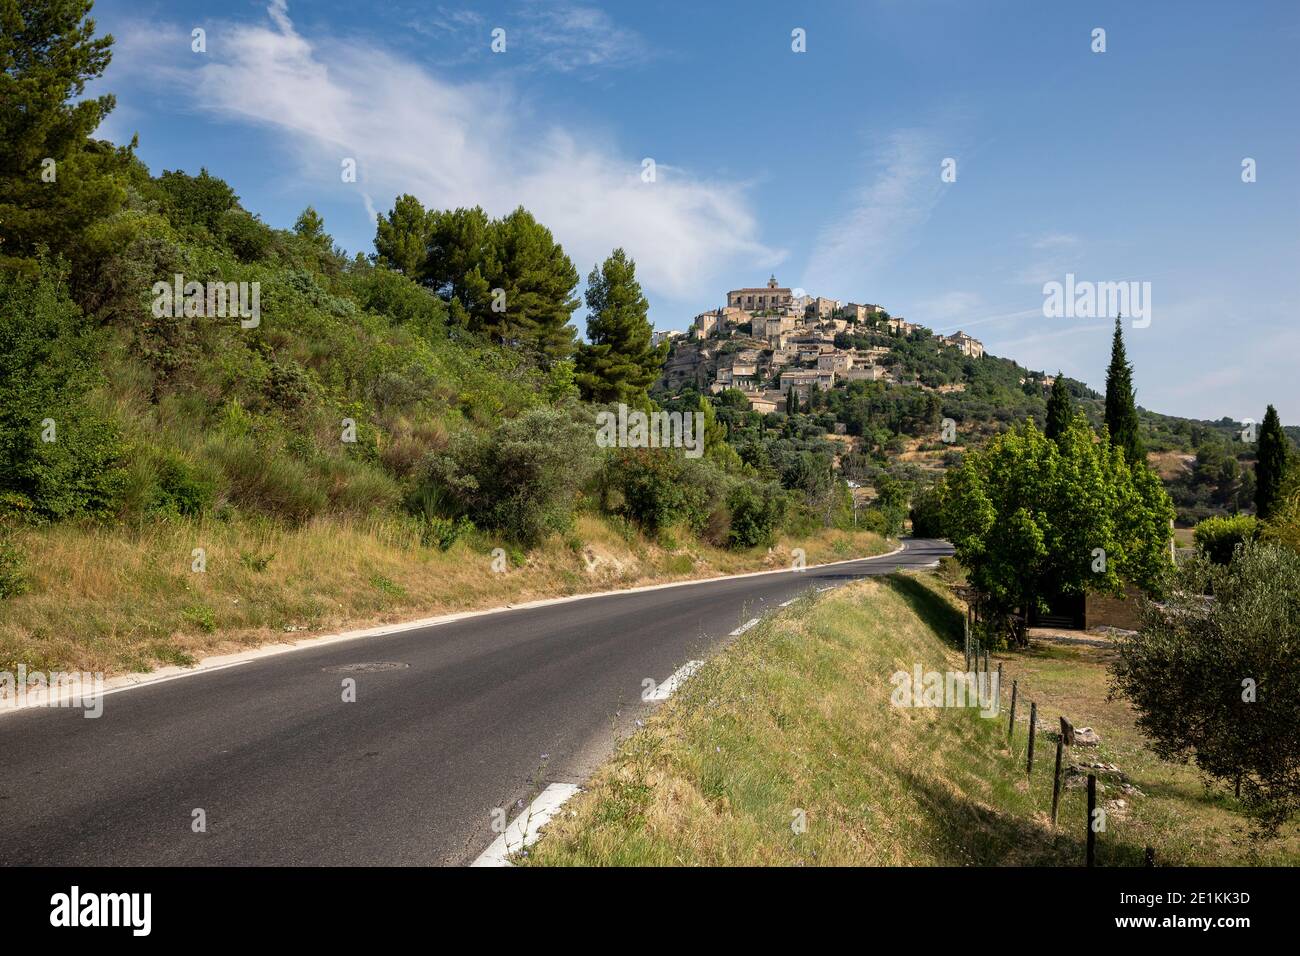 Roadside view of the beautiful town of Gordes,a commune in the Vaucluse département in the Provence-Alpes-Côte d'Azur region in southeastern France Stock Photo